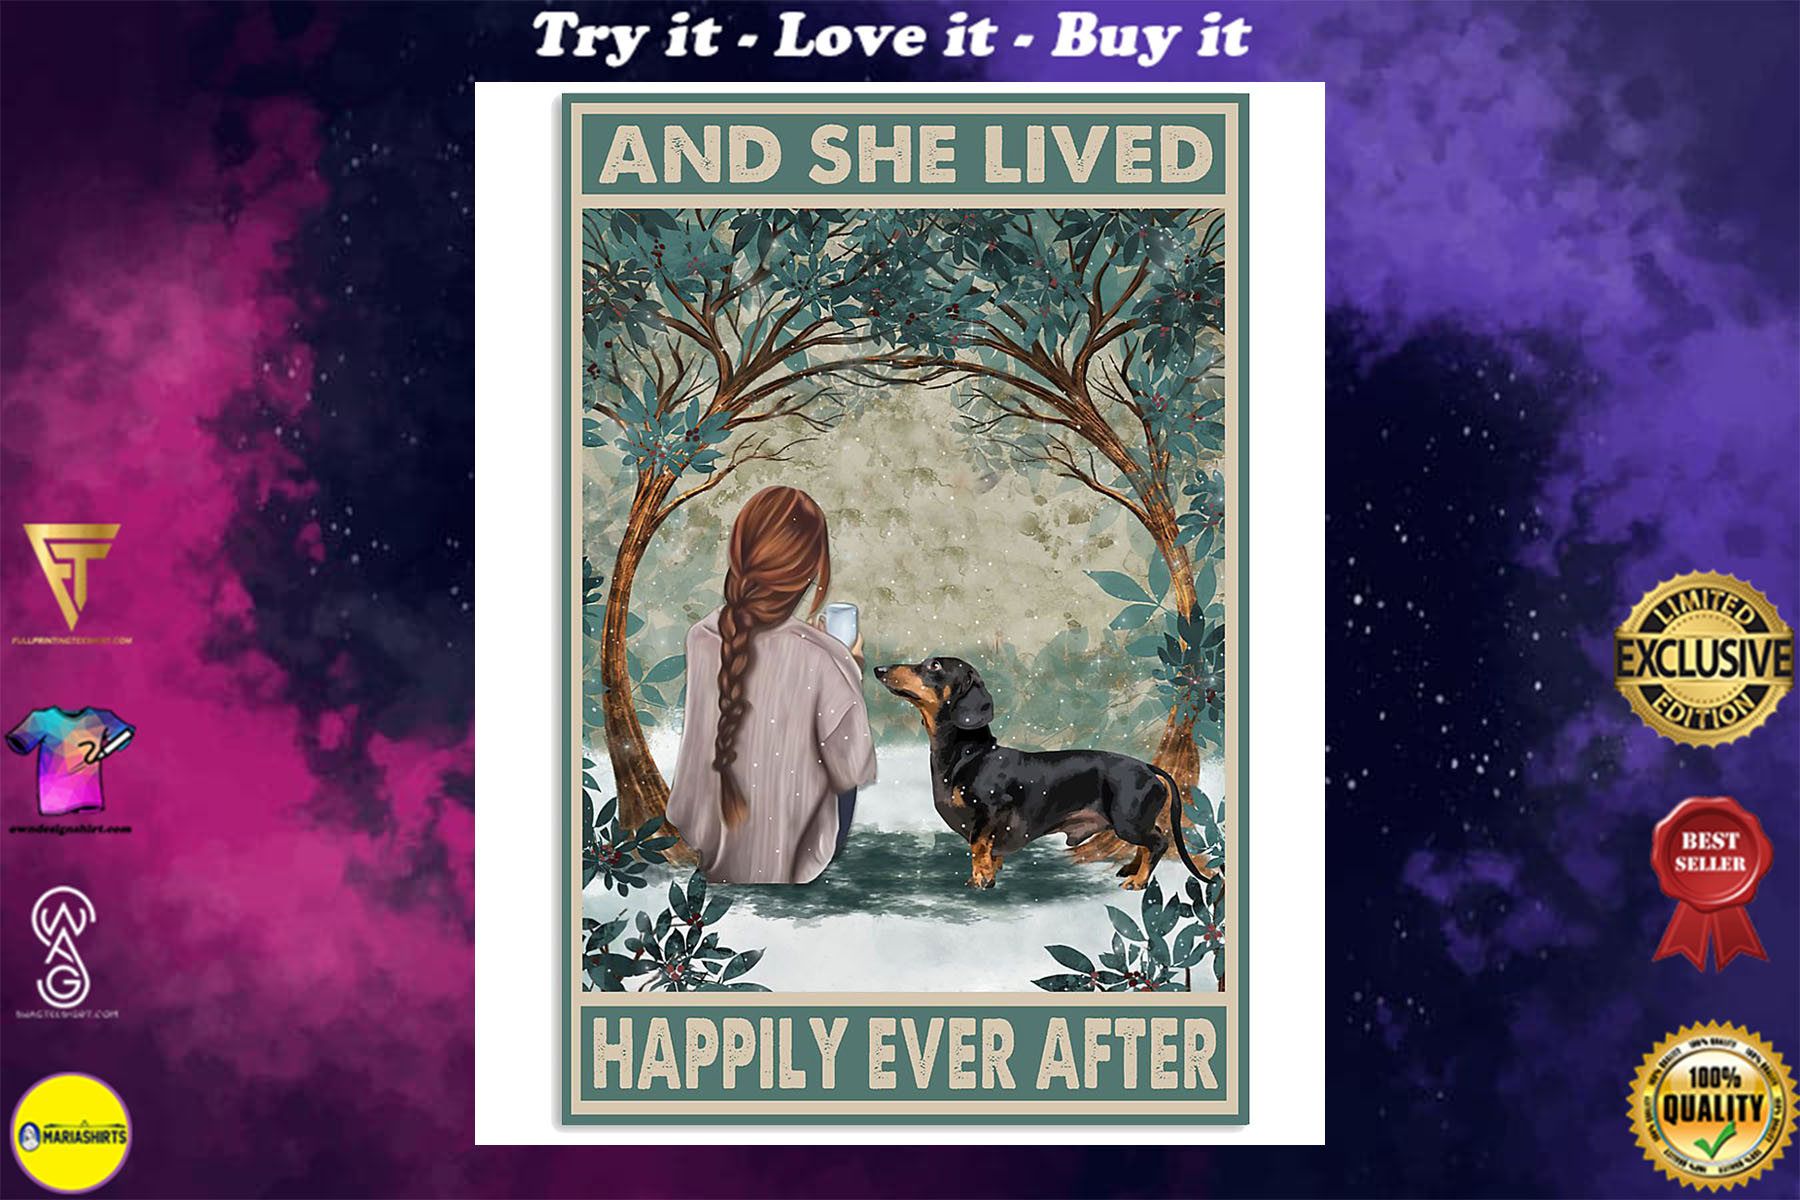 dachshund and she lived happily ever after retro poster